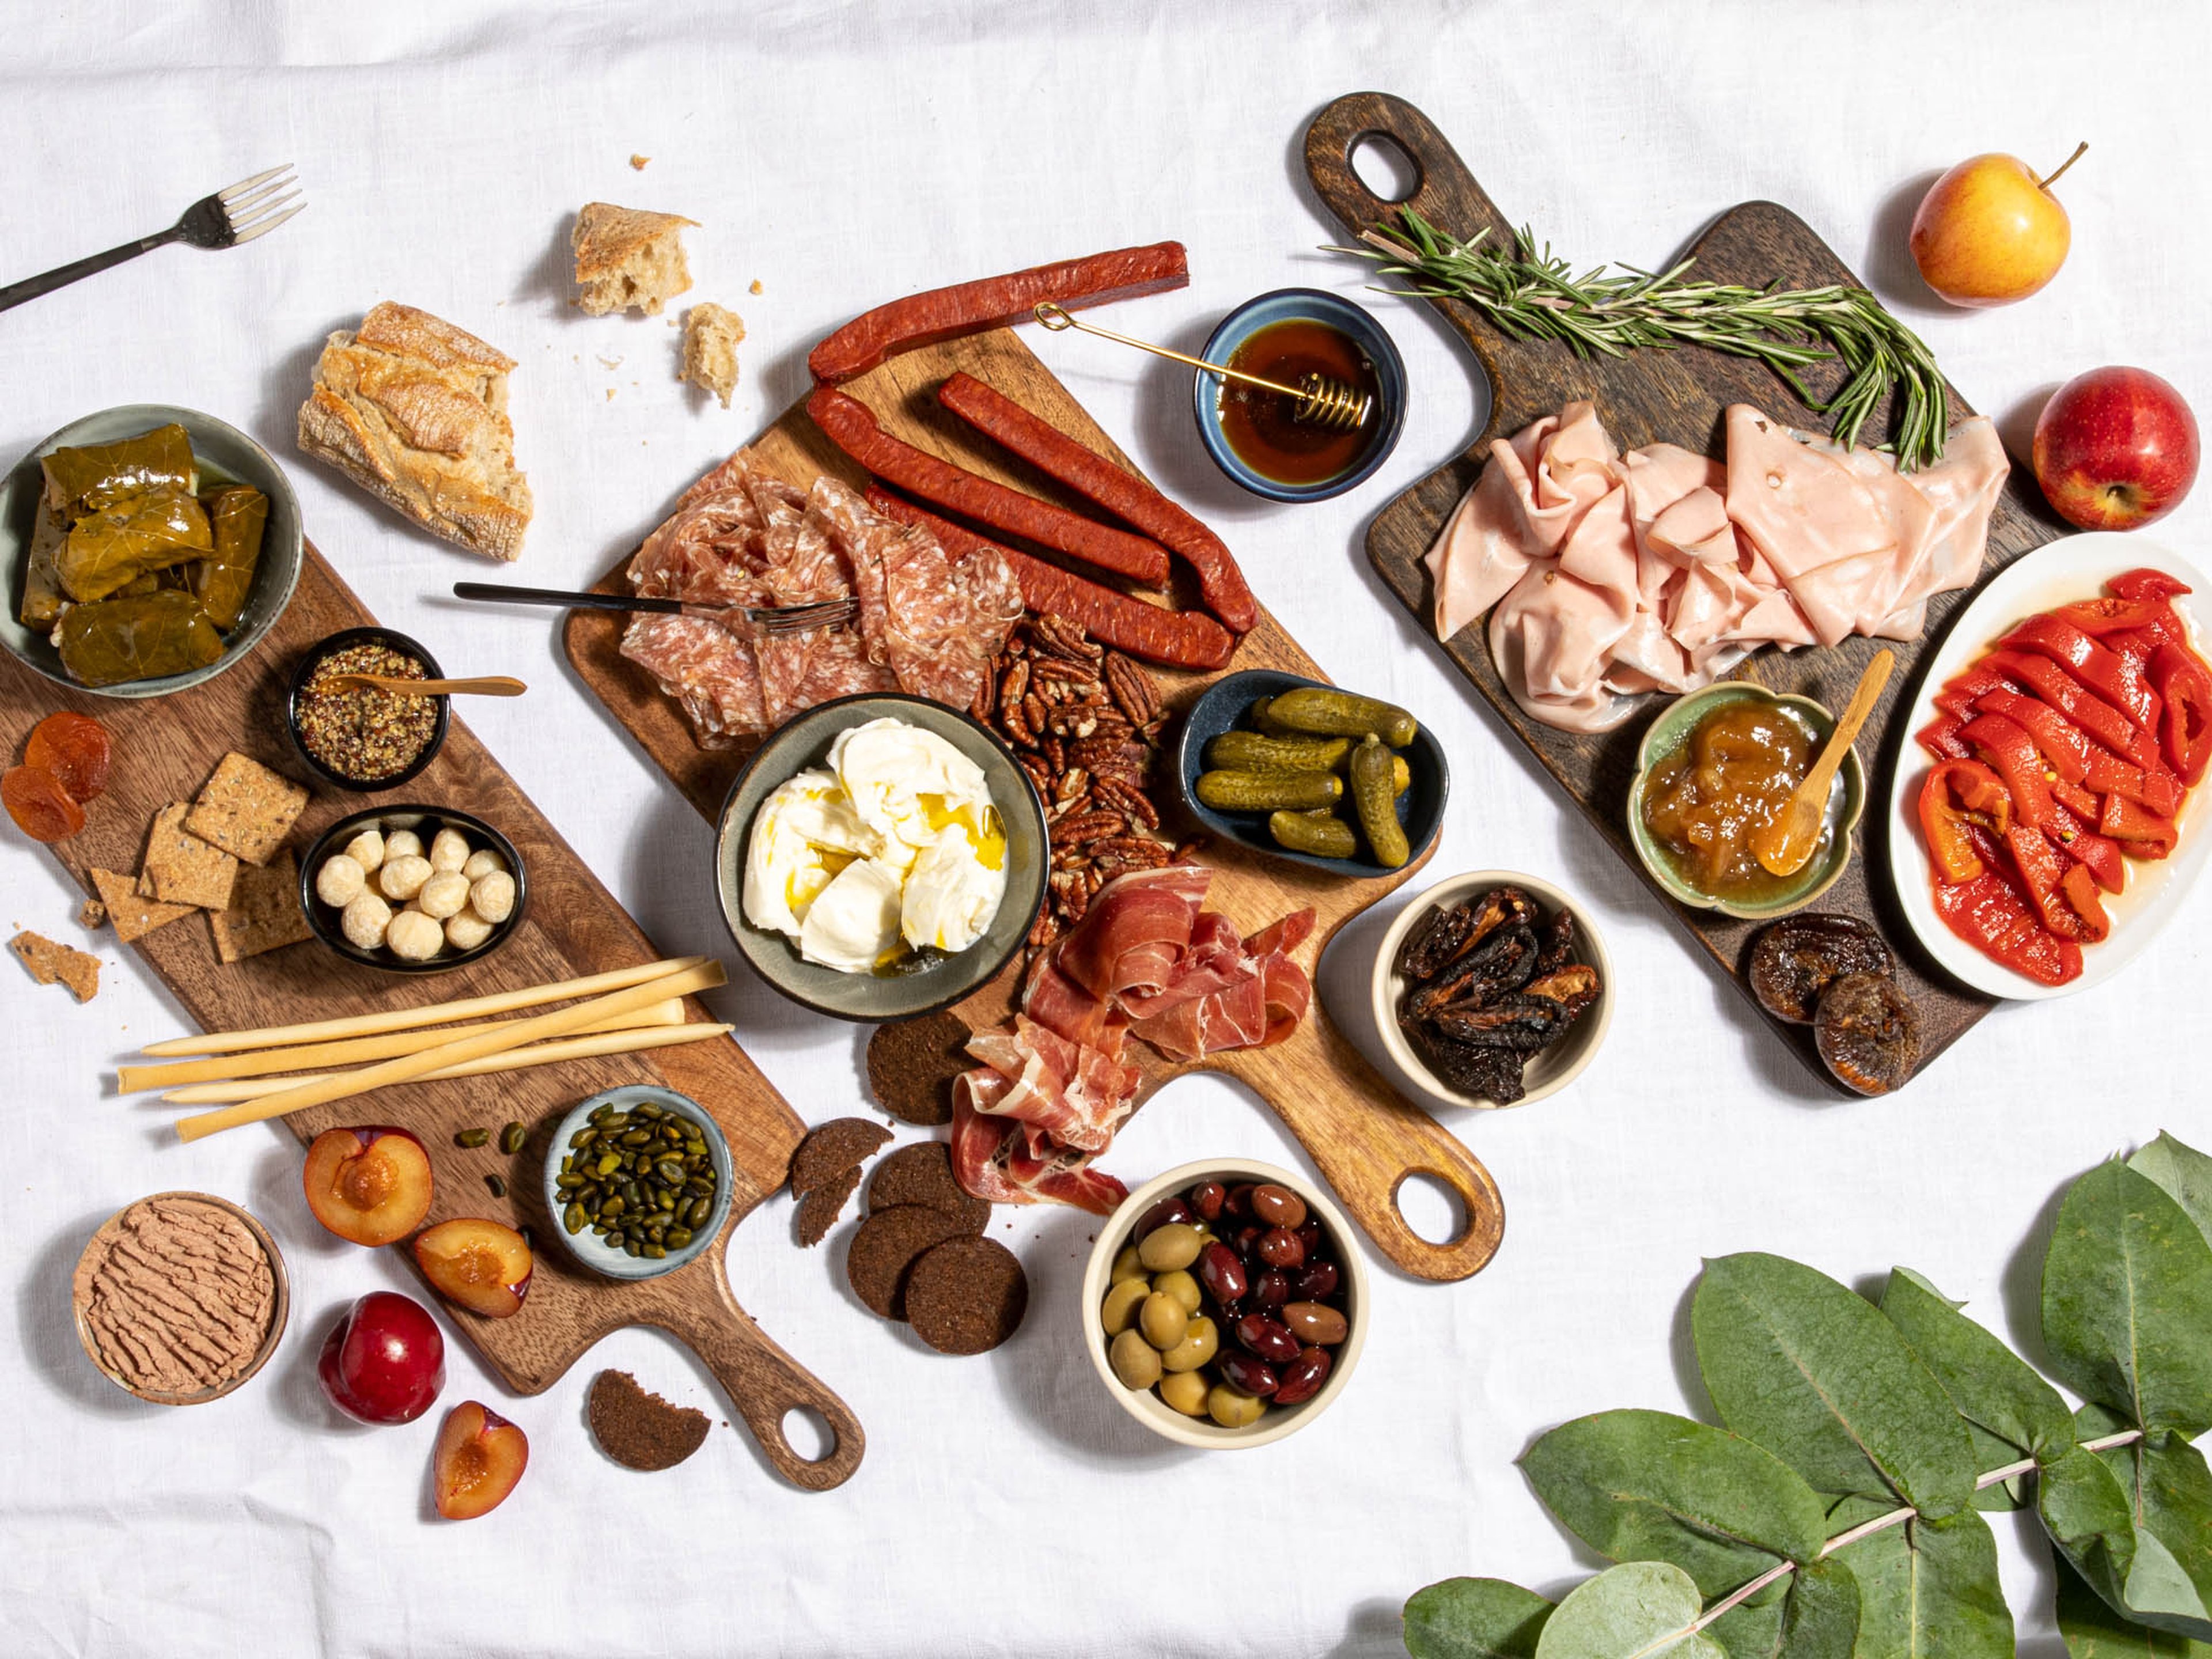 How to Build an Antipasti Platter Worth Dreaming About